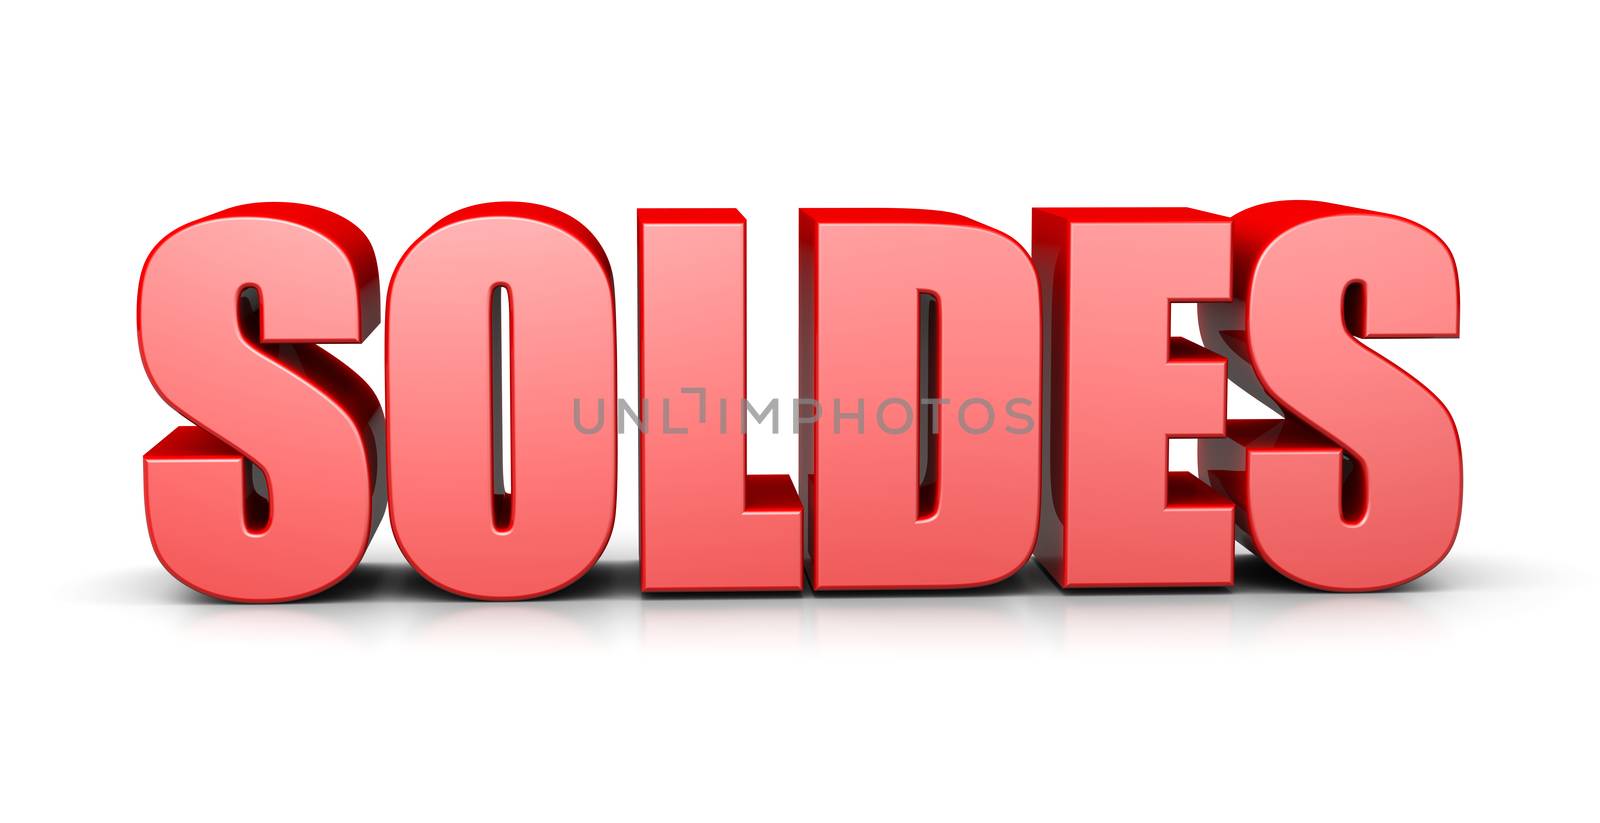 Sales Red 3D Text French Language Illustration on White Background